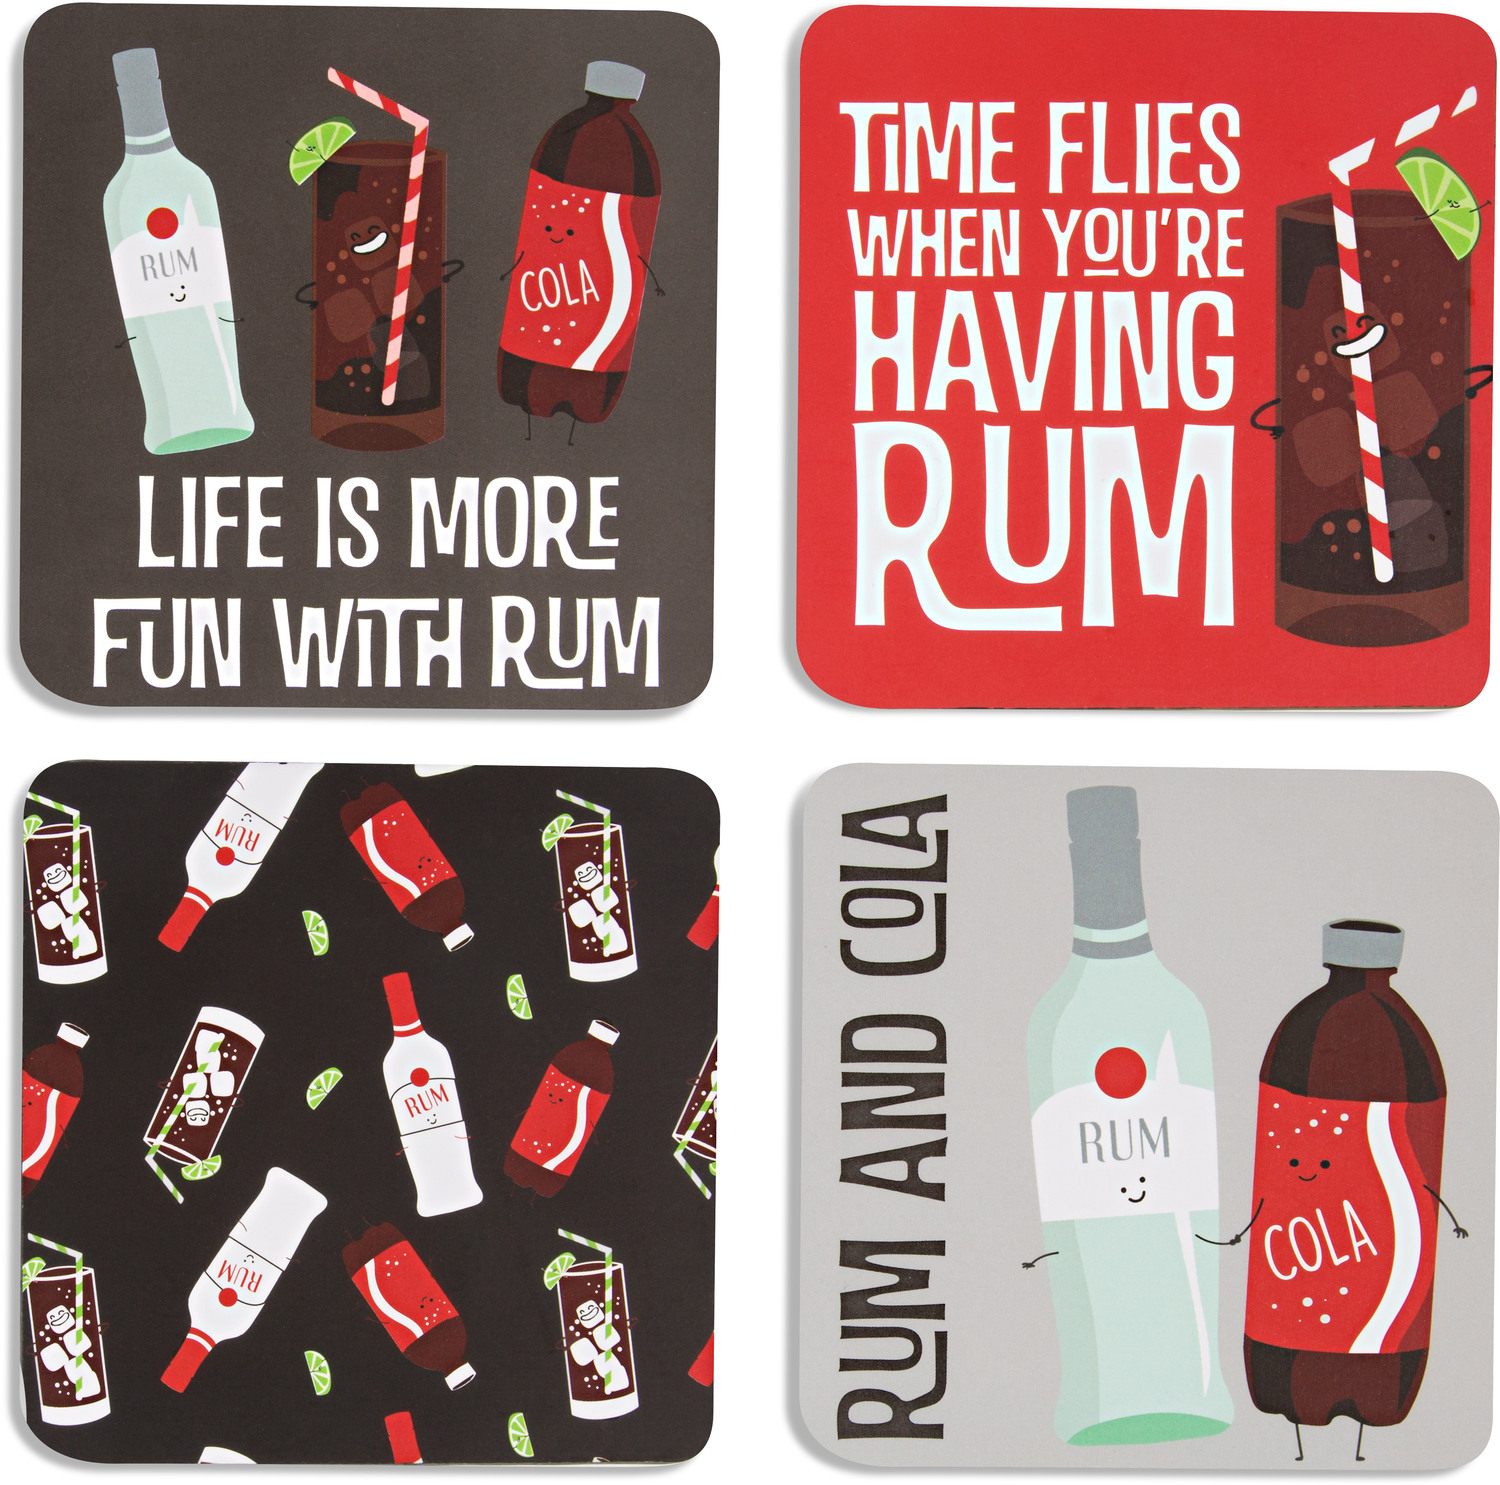 Rum & Cola by Late Night Last Call - Rum & Cola - 4" (4 Piece) Coaster Set with Box